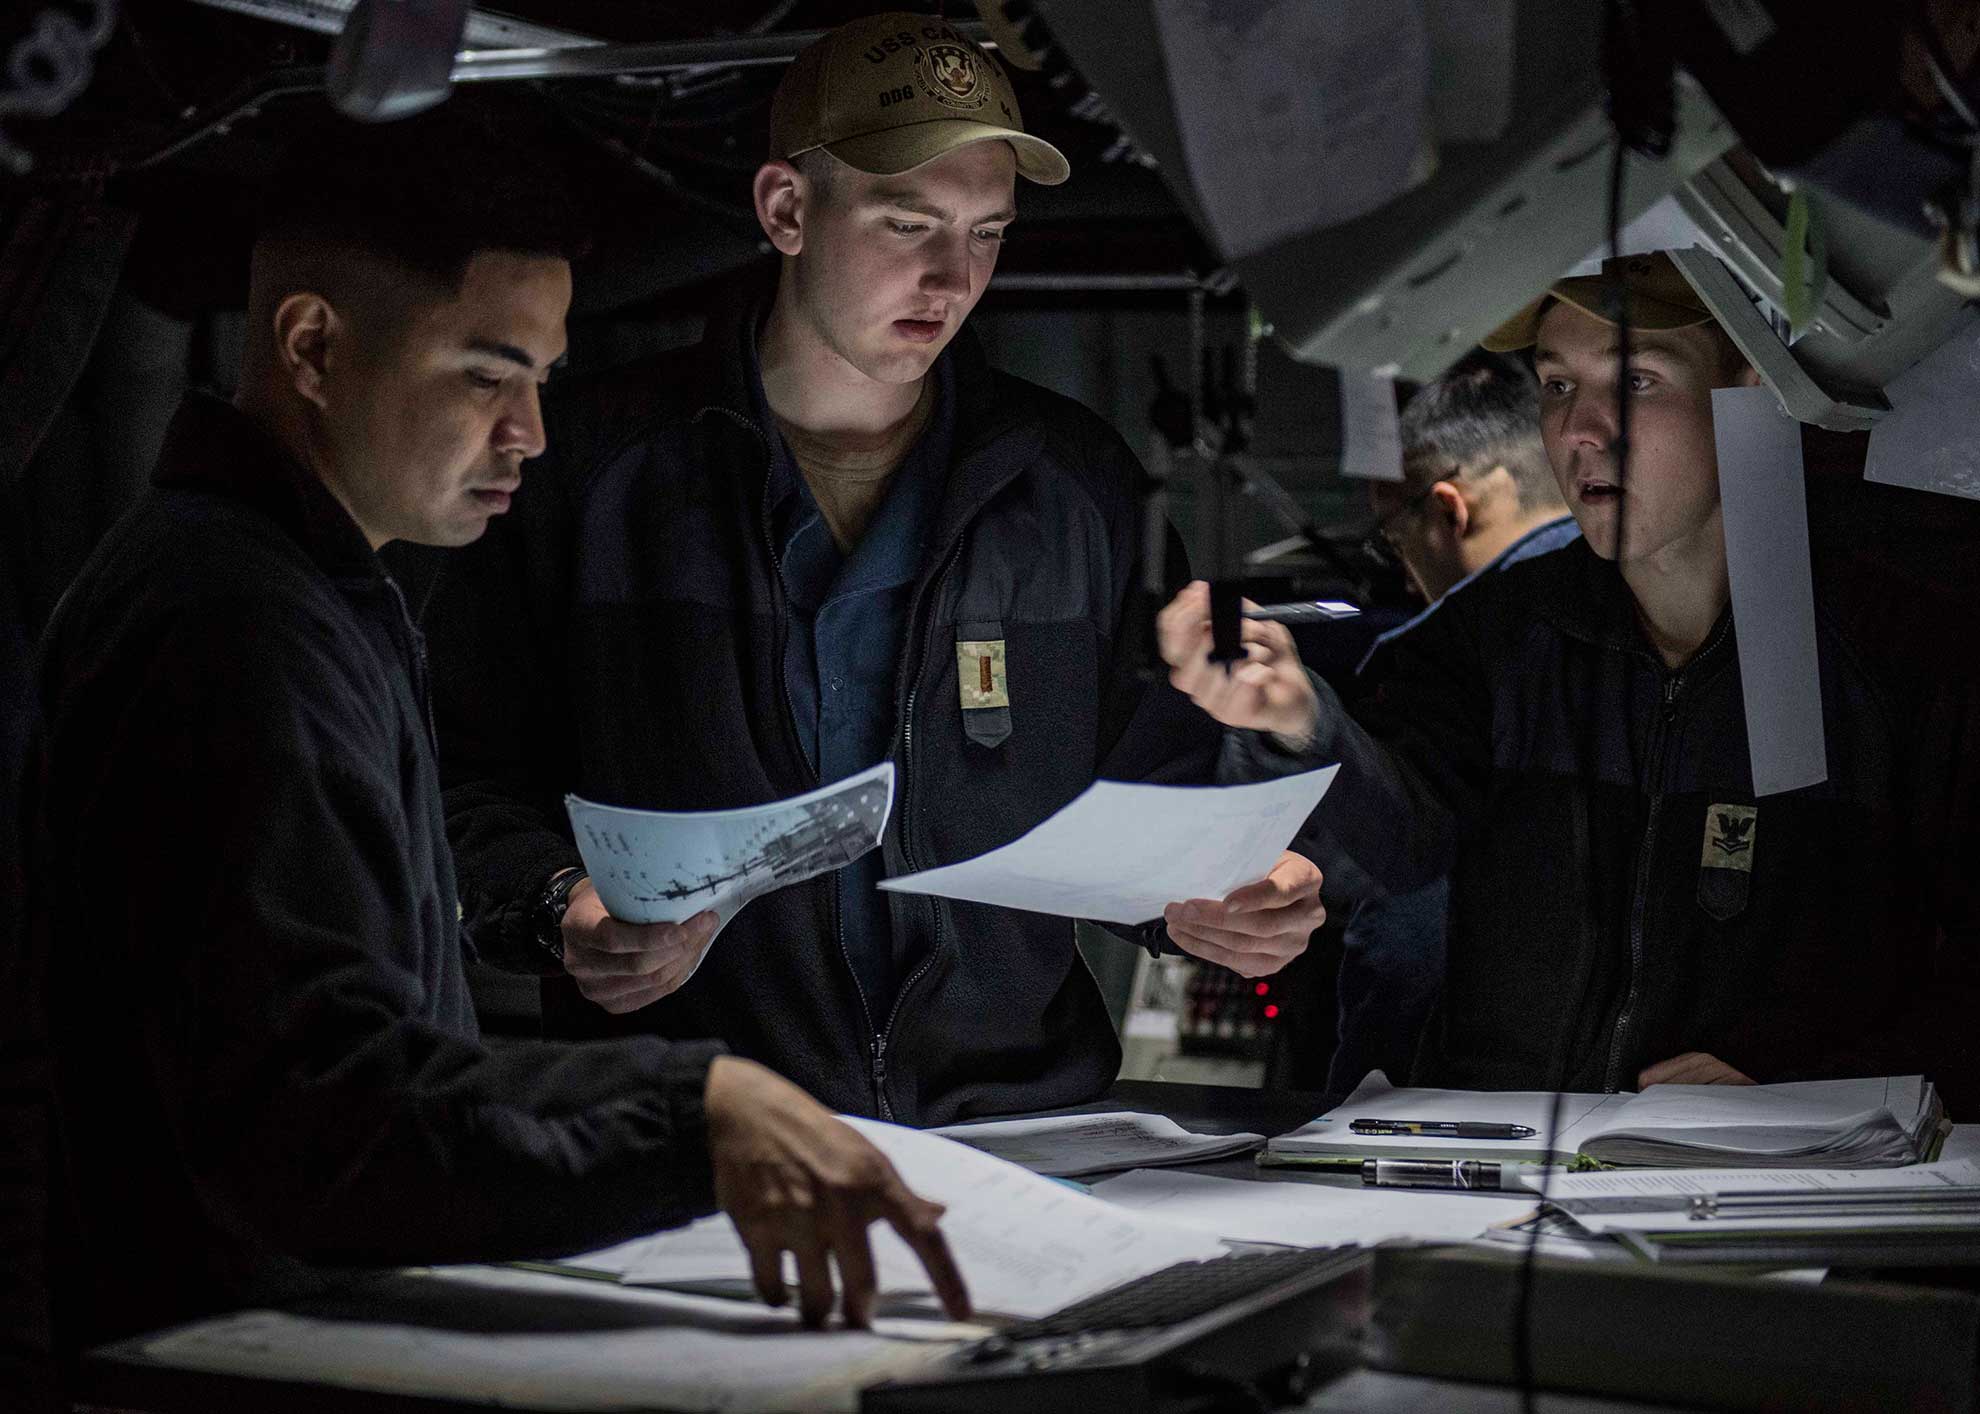 Atlantic Ocean (May 8, 2019) Ensign John Penner, center, from Arlington Heights, Illinois, receives combat information center watch officer training from Operations Specialist 1st Class Joseph Yambao, left, from Beaverton, Oregon, and Operations Specialist 2nd Class Taylor Seleck, from Cedar Rapids, Iowa, aboard the Arleigh Burke-class guided-missile destroyer USS Carney (DDG 64) during Formidable Shield 19, May 8, 2019. Formidable Shield is designed to improve allied interoperability in a live-fire integrated air and missile defense environment, using NATO command and control reporting structures. (U.S. Navy photo by Mass Communication Specialist 1st Class Fred Gray IV. -